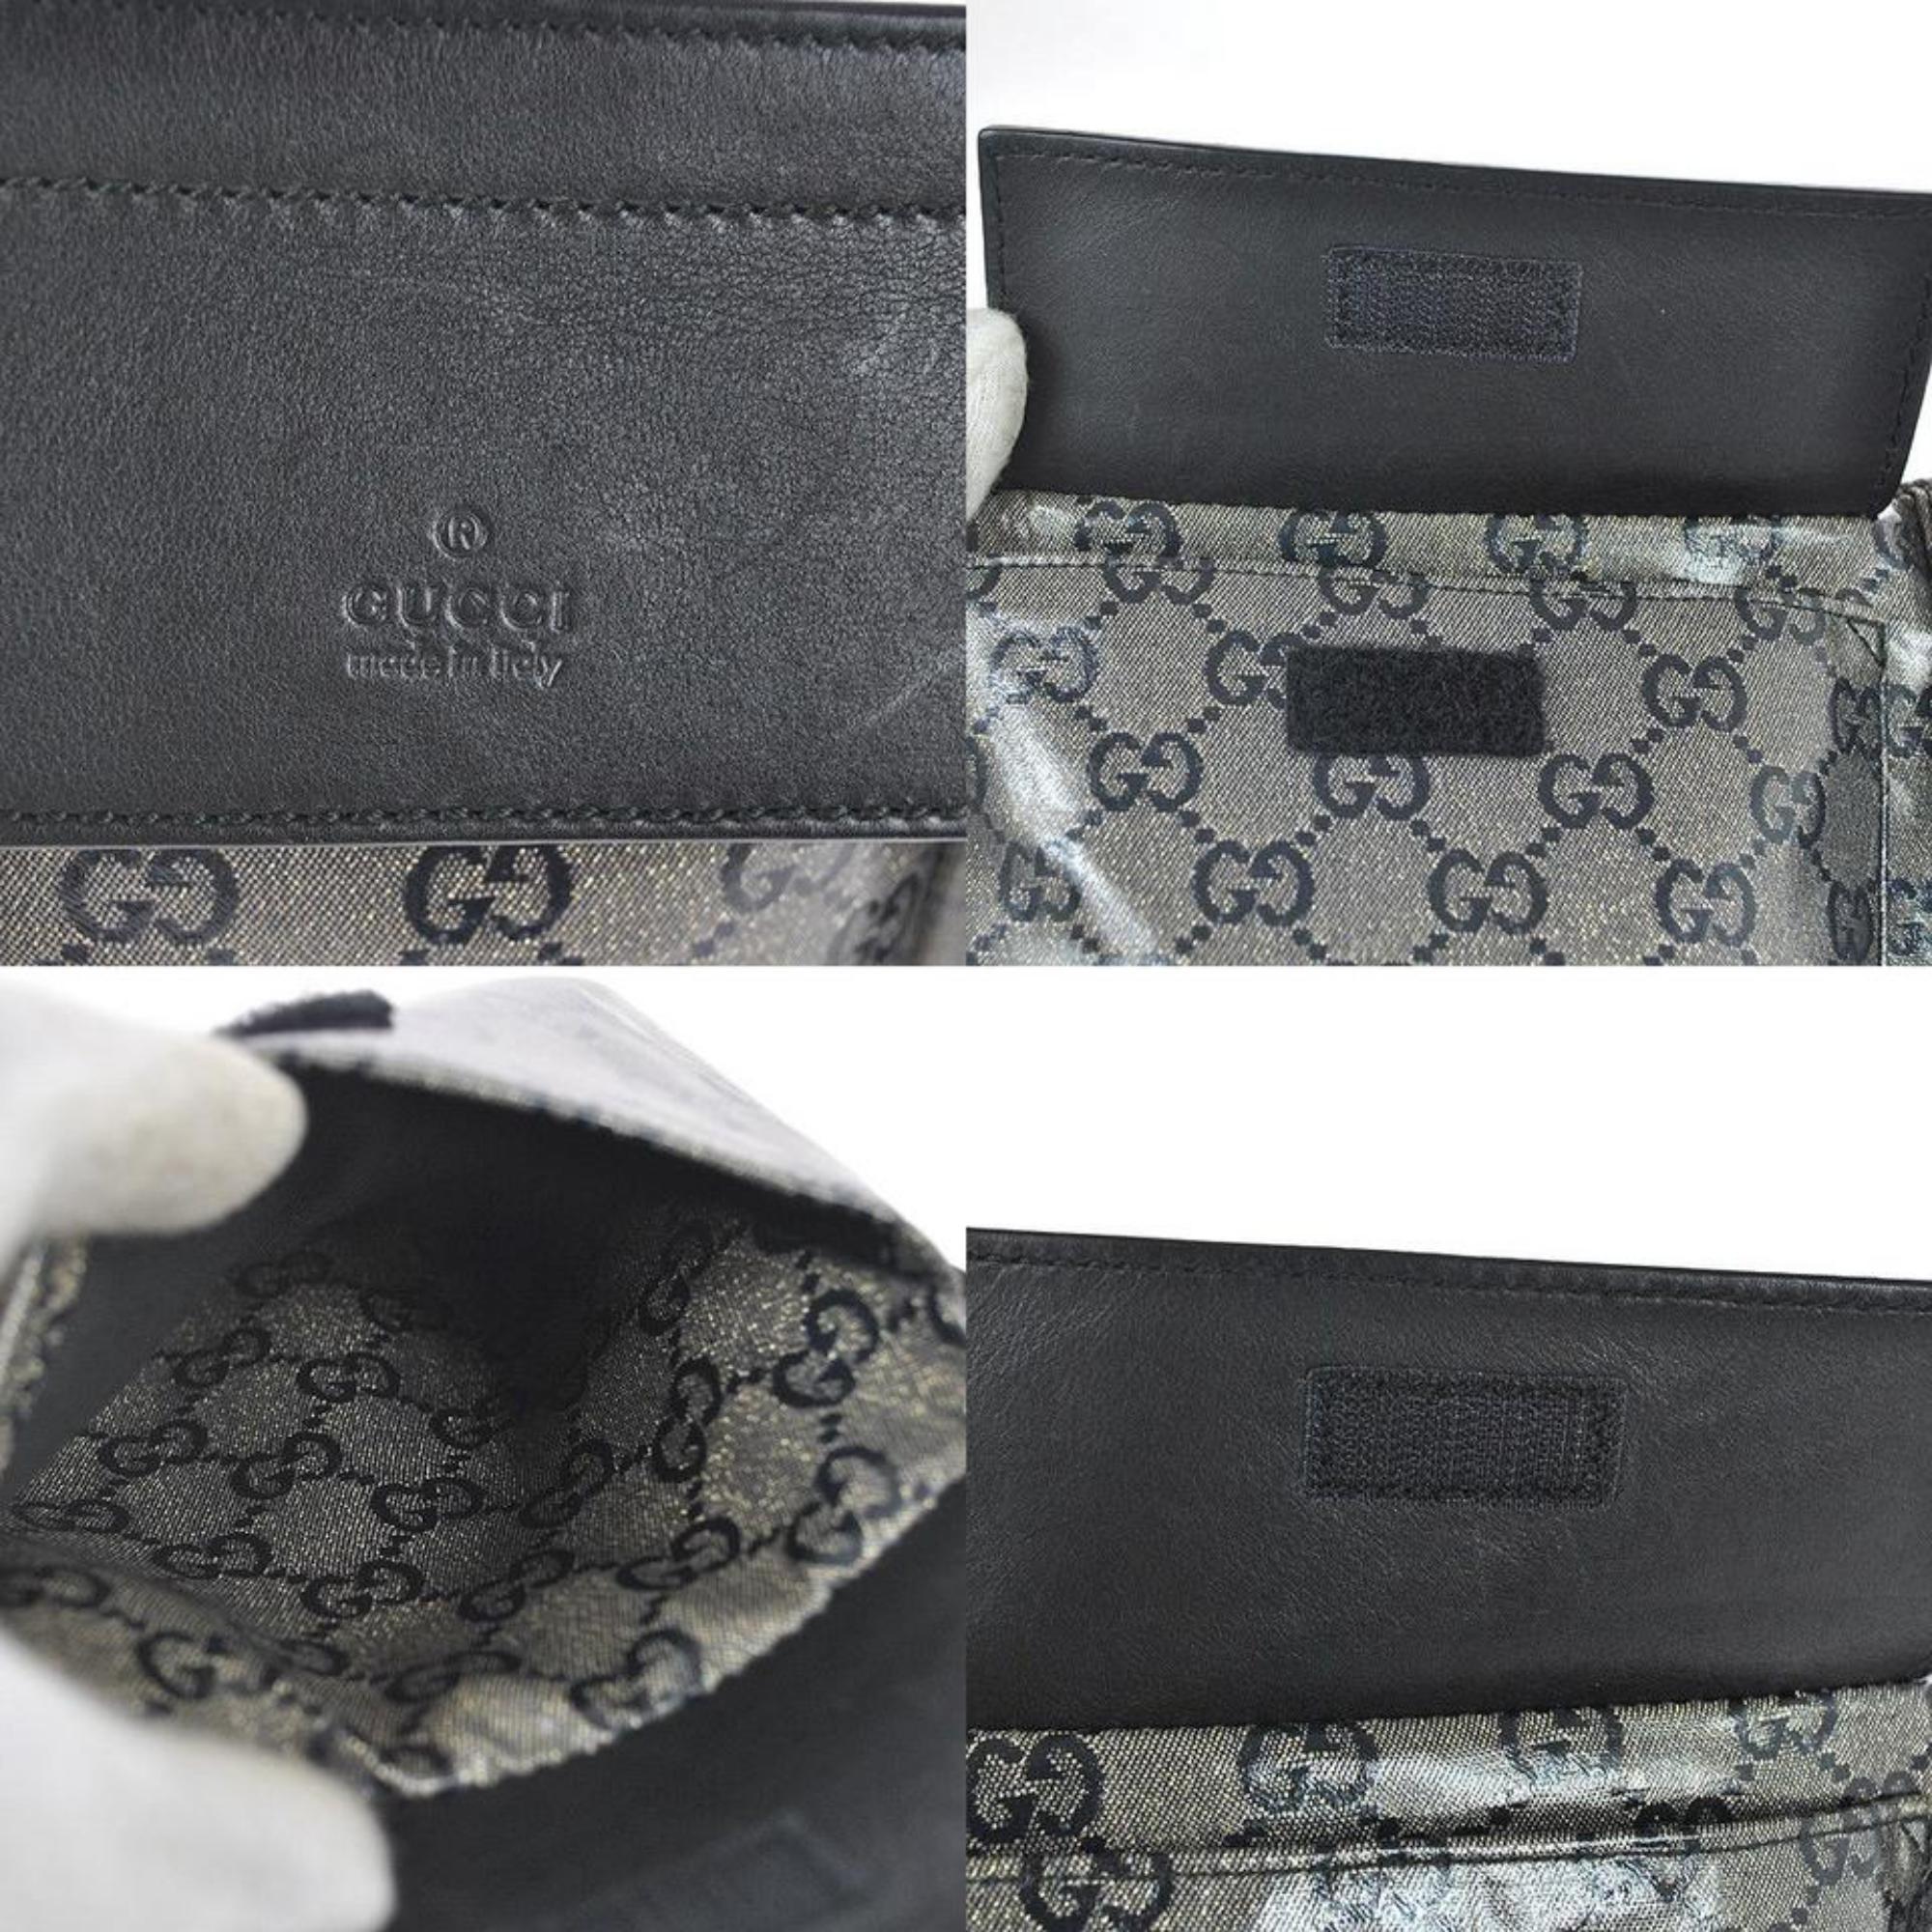 Gucci Monogram Crystal Gg Fanny Pack Belt 868029 Grey Canvas Cross Body Bag In Excellent Condition For Sale In Forest Hills, NY